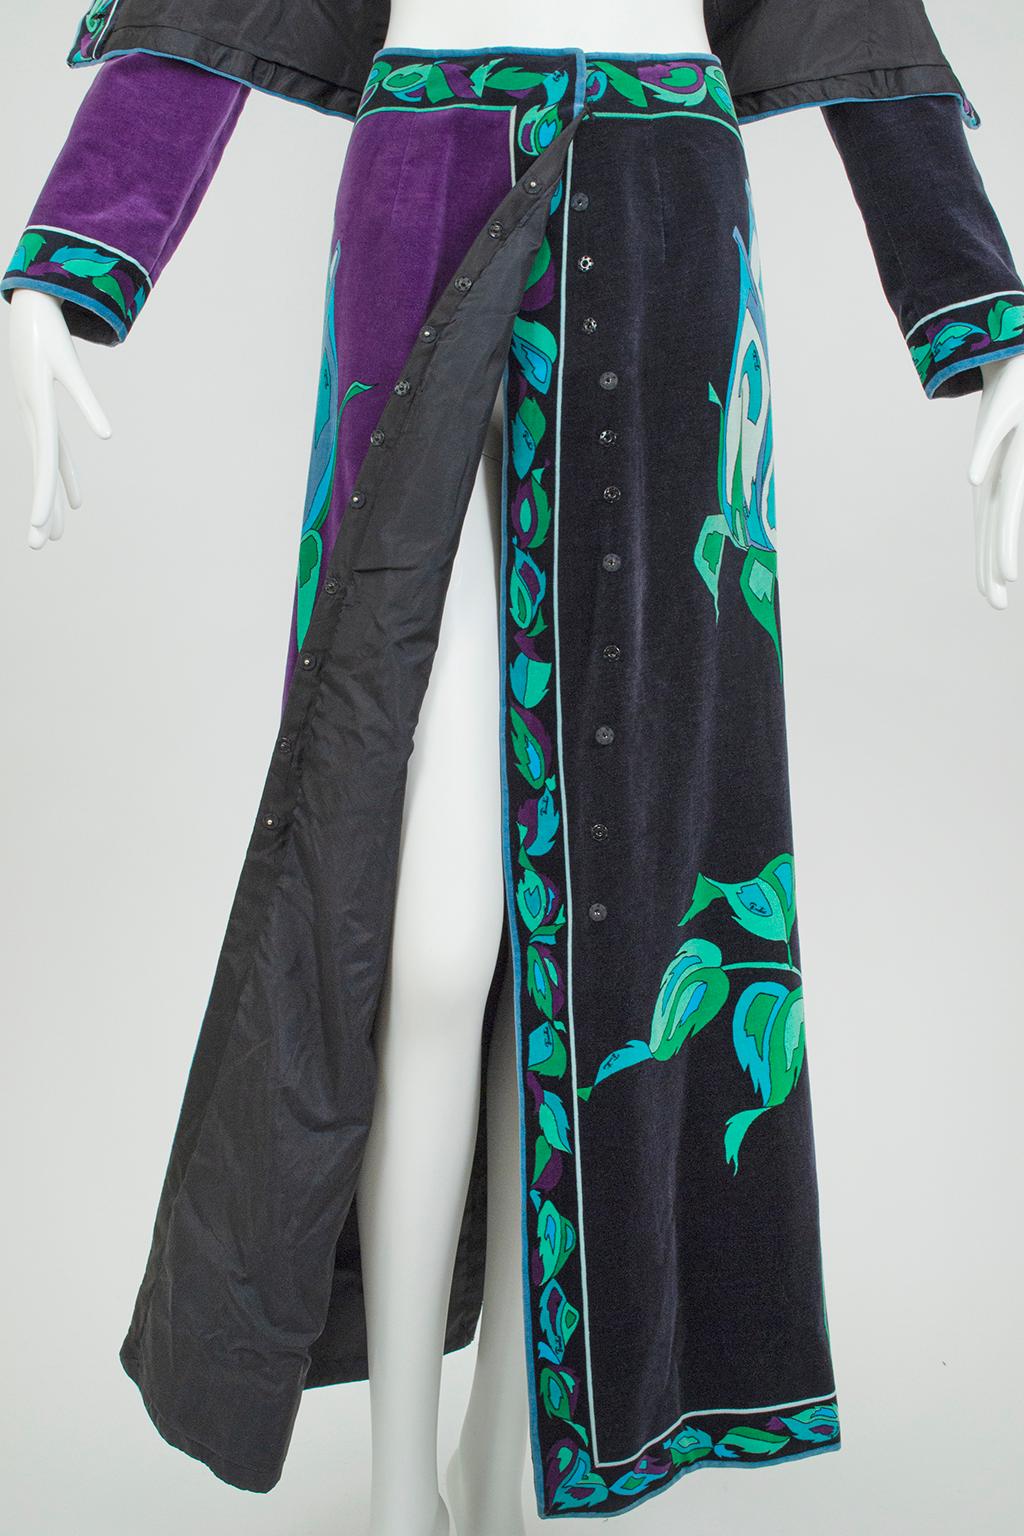 Emilio Pucci Black and Purple Rose Velvet Jacket and Maxi Skirt, Saks – S, 1971 For Sale 8